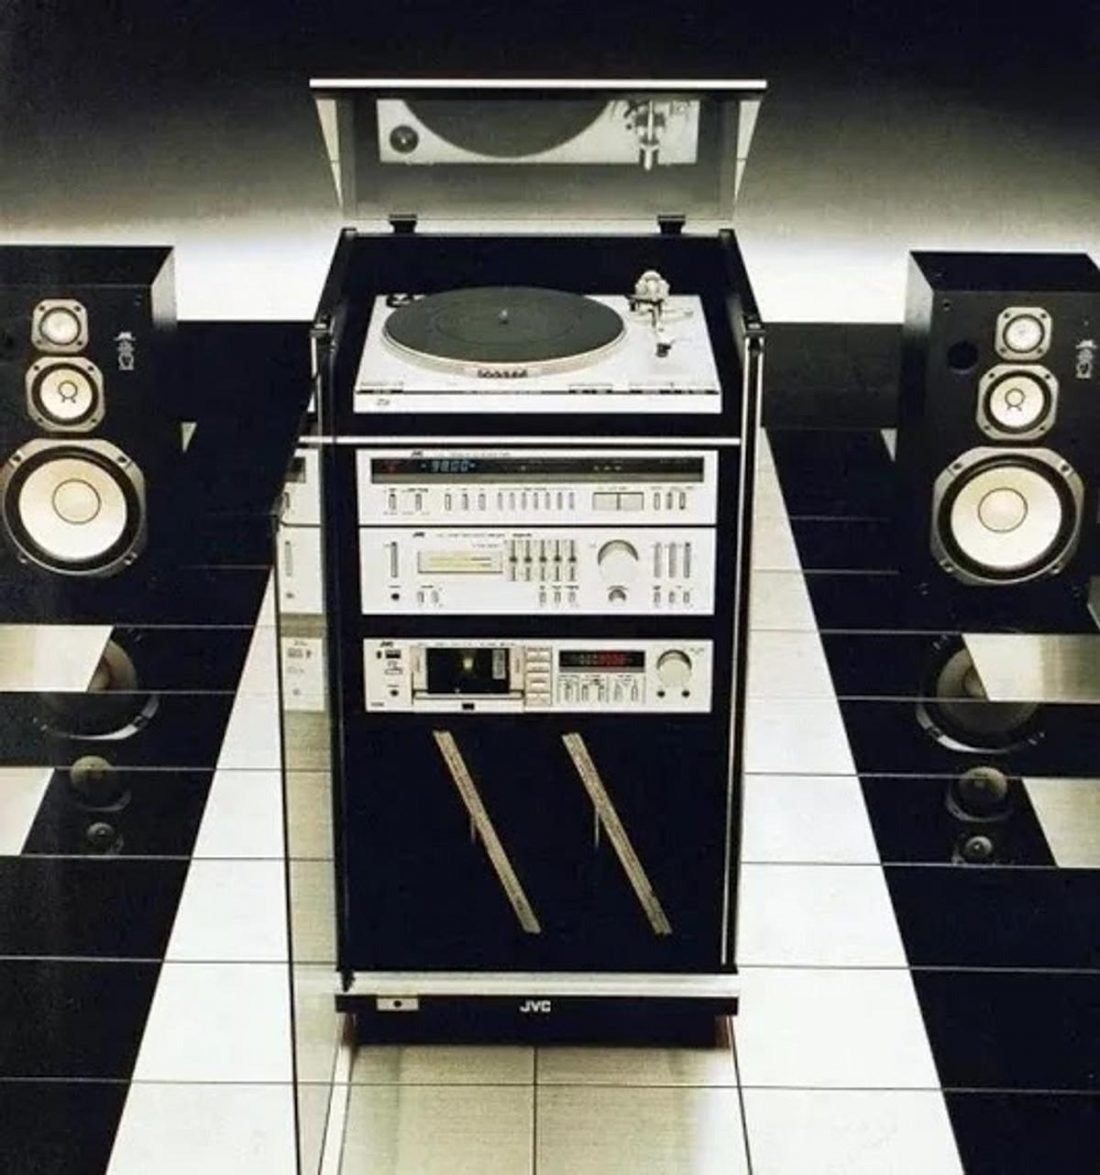 Tuner, turntable, tape deck and receiver, all in a large rack made specifically for the set. They don't make audio equipment like they used to. (From: 1001Hifi.com)